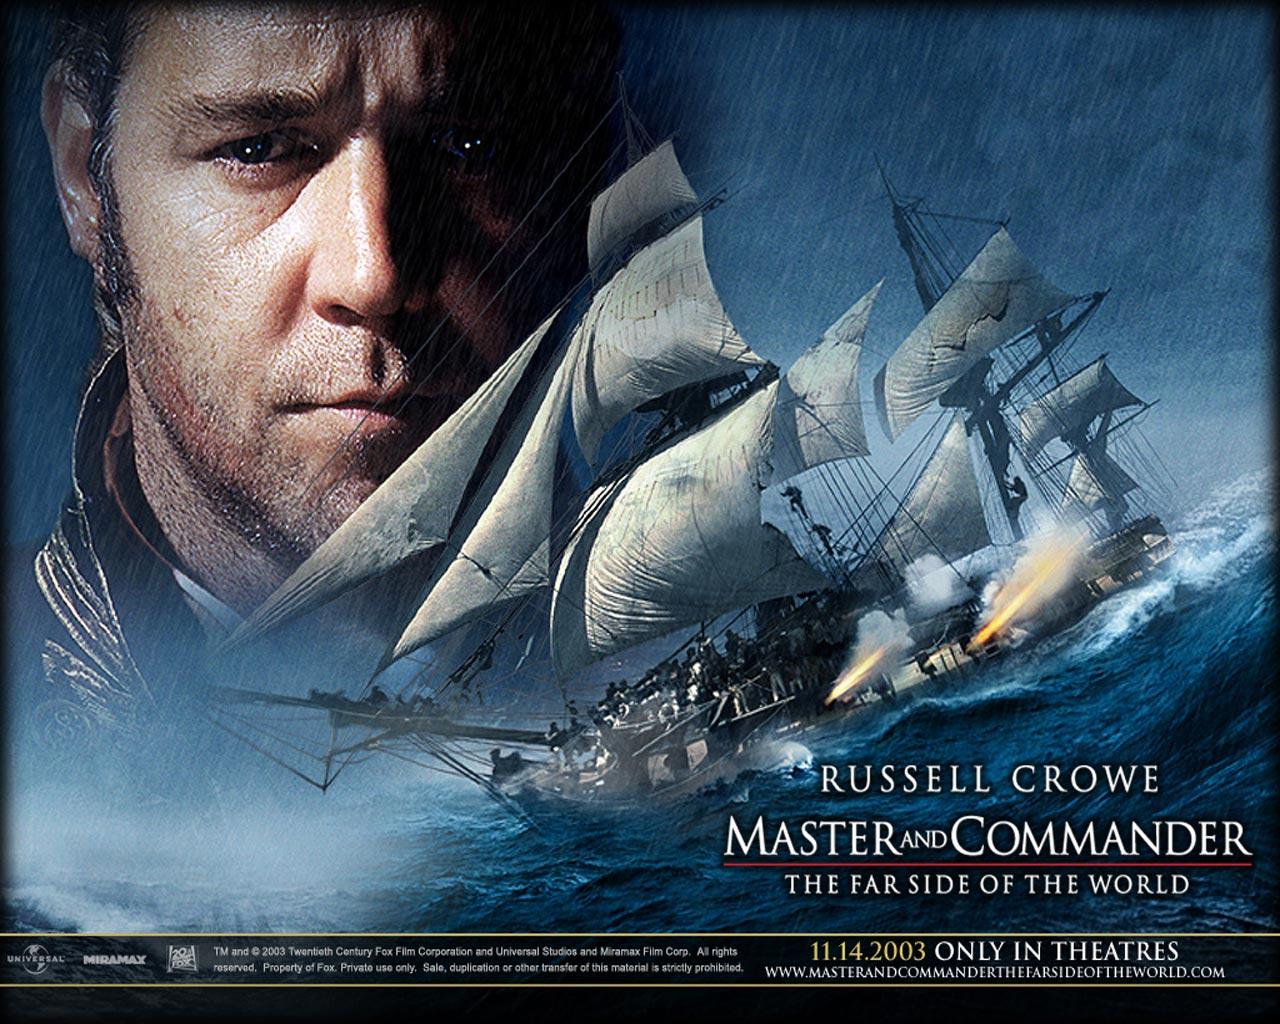 Master And Commander: The Far Side Of The World Wallpaper #3 1280 x 1024 